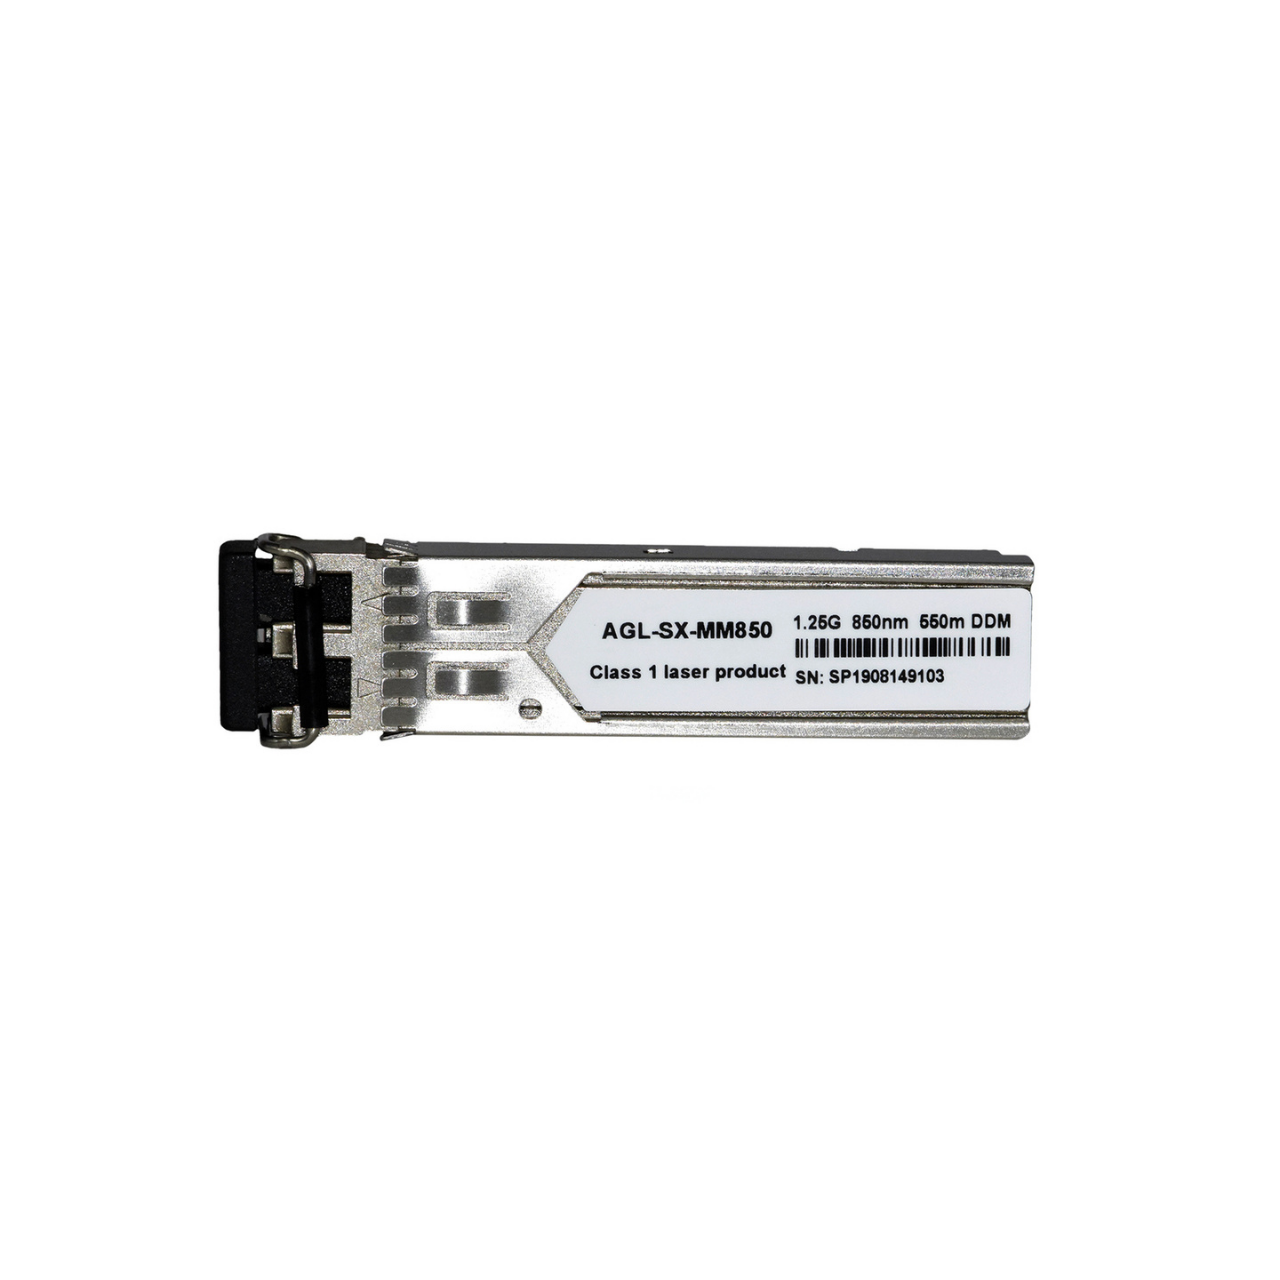 High Performance SFP 1000B LC GBIC with 1310nm Wavelength for Enhanced Connectivity up to 2km